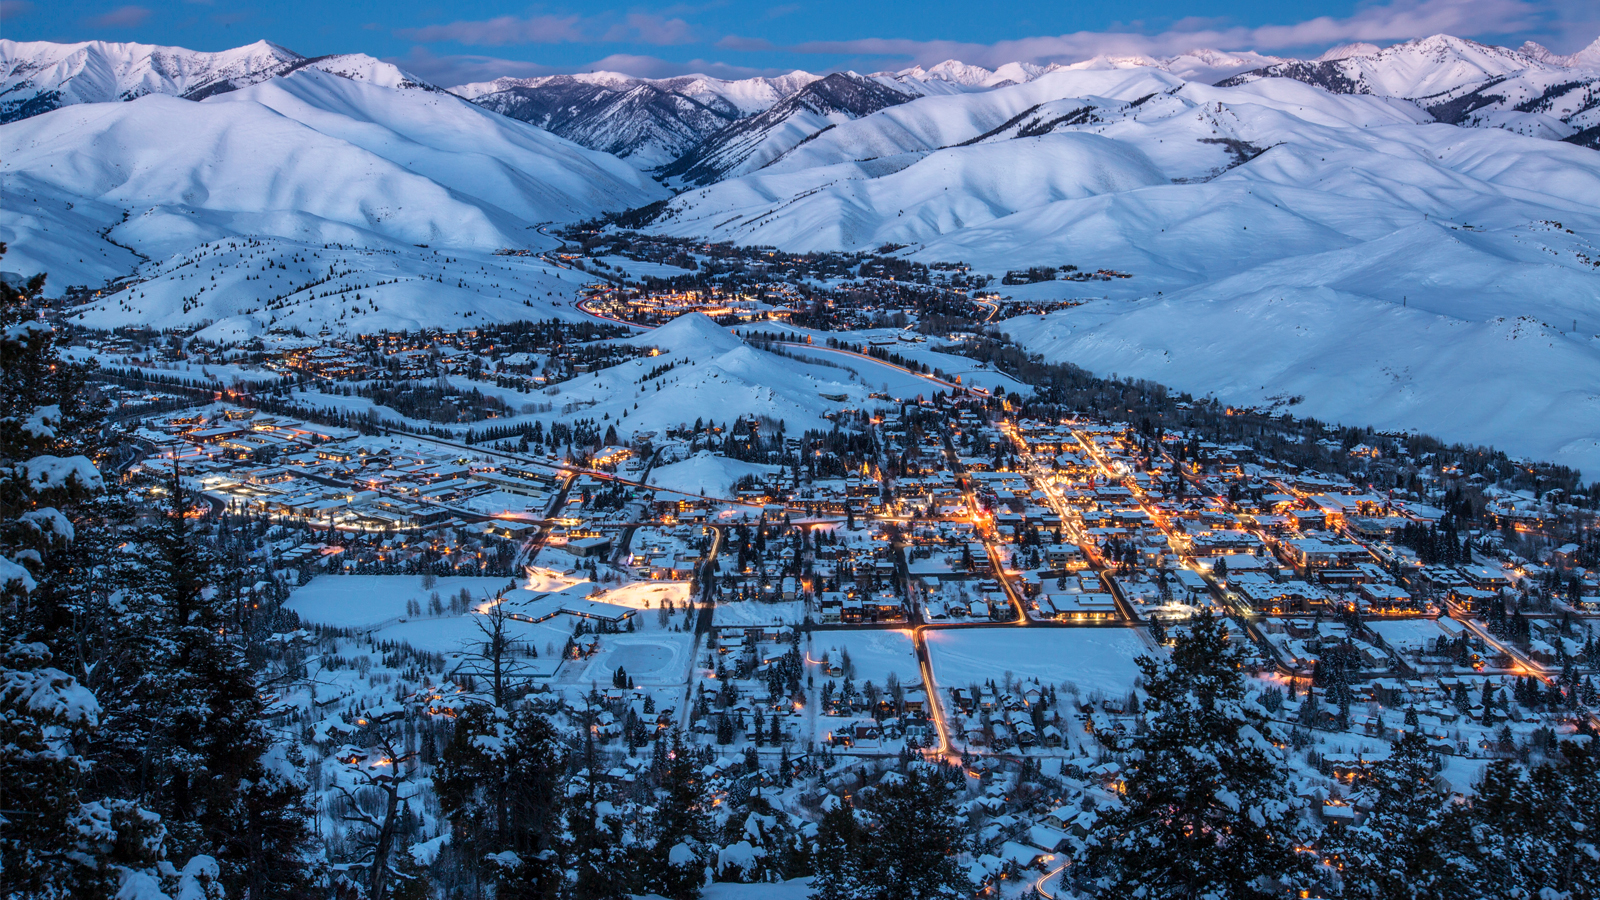 The Skier's Guide to Sun Valley FREESKIER